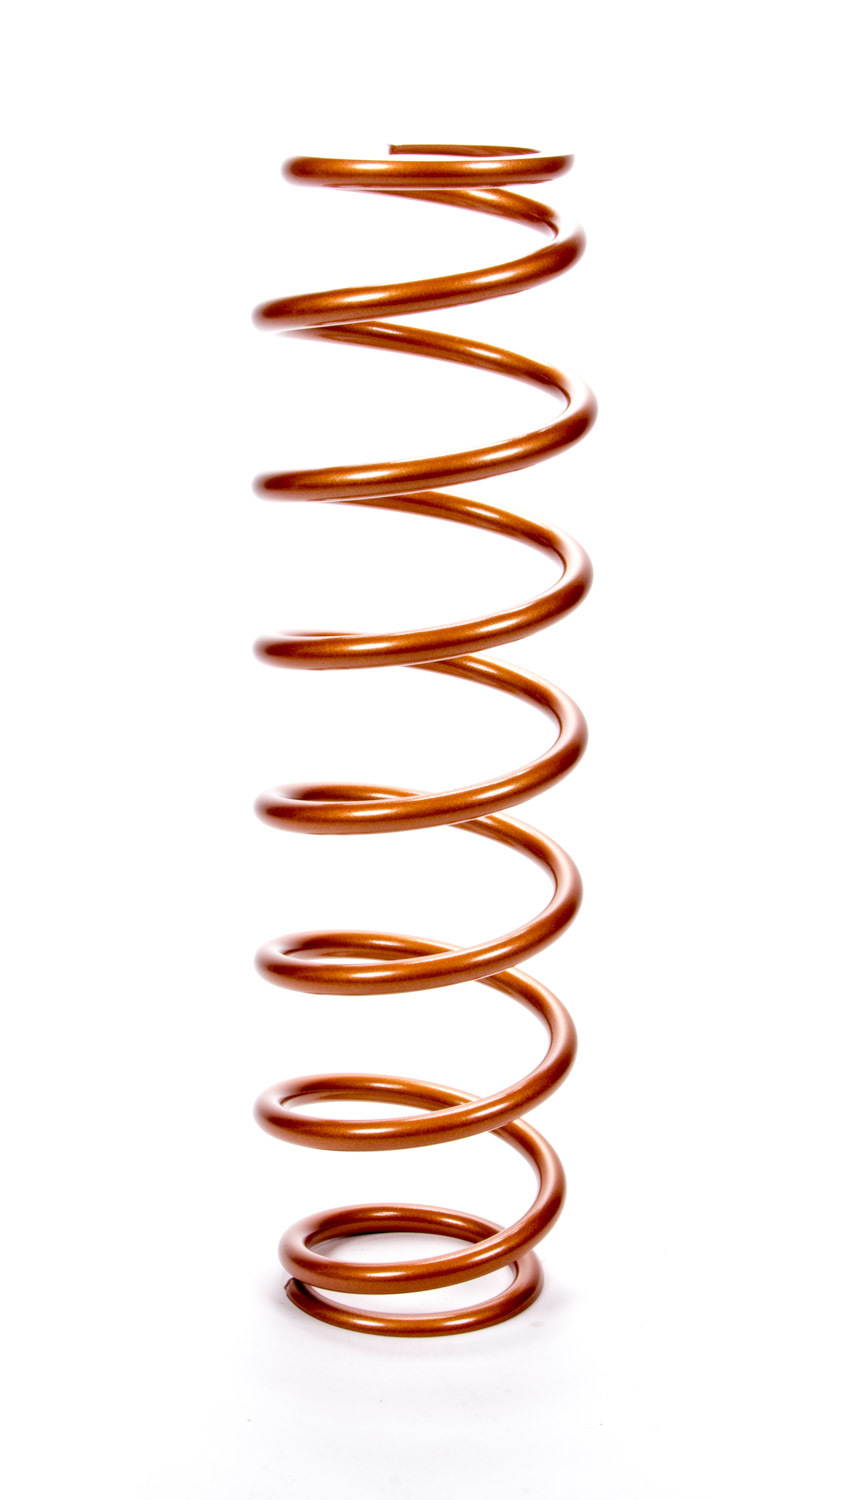 Swift Springs 140-250-150BP Coil Spring, Barrel, Coil-Over, 2.500 in ID, 14.000 in Length, 150 lb/in Spring Rate, Steel, Copper Powder Coat, Each